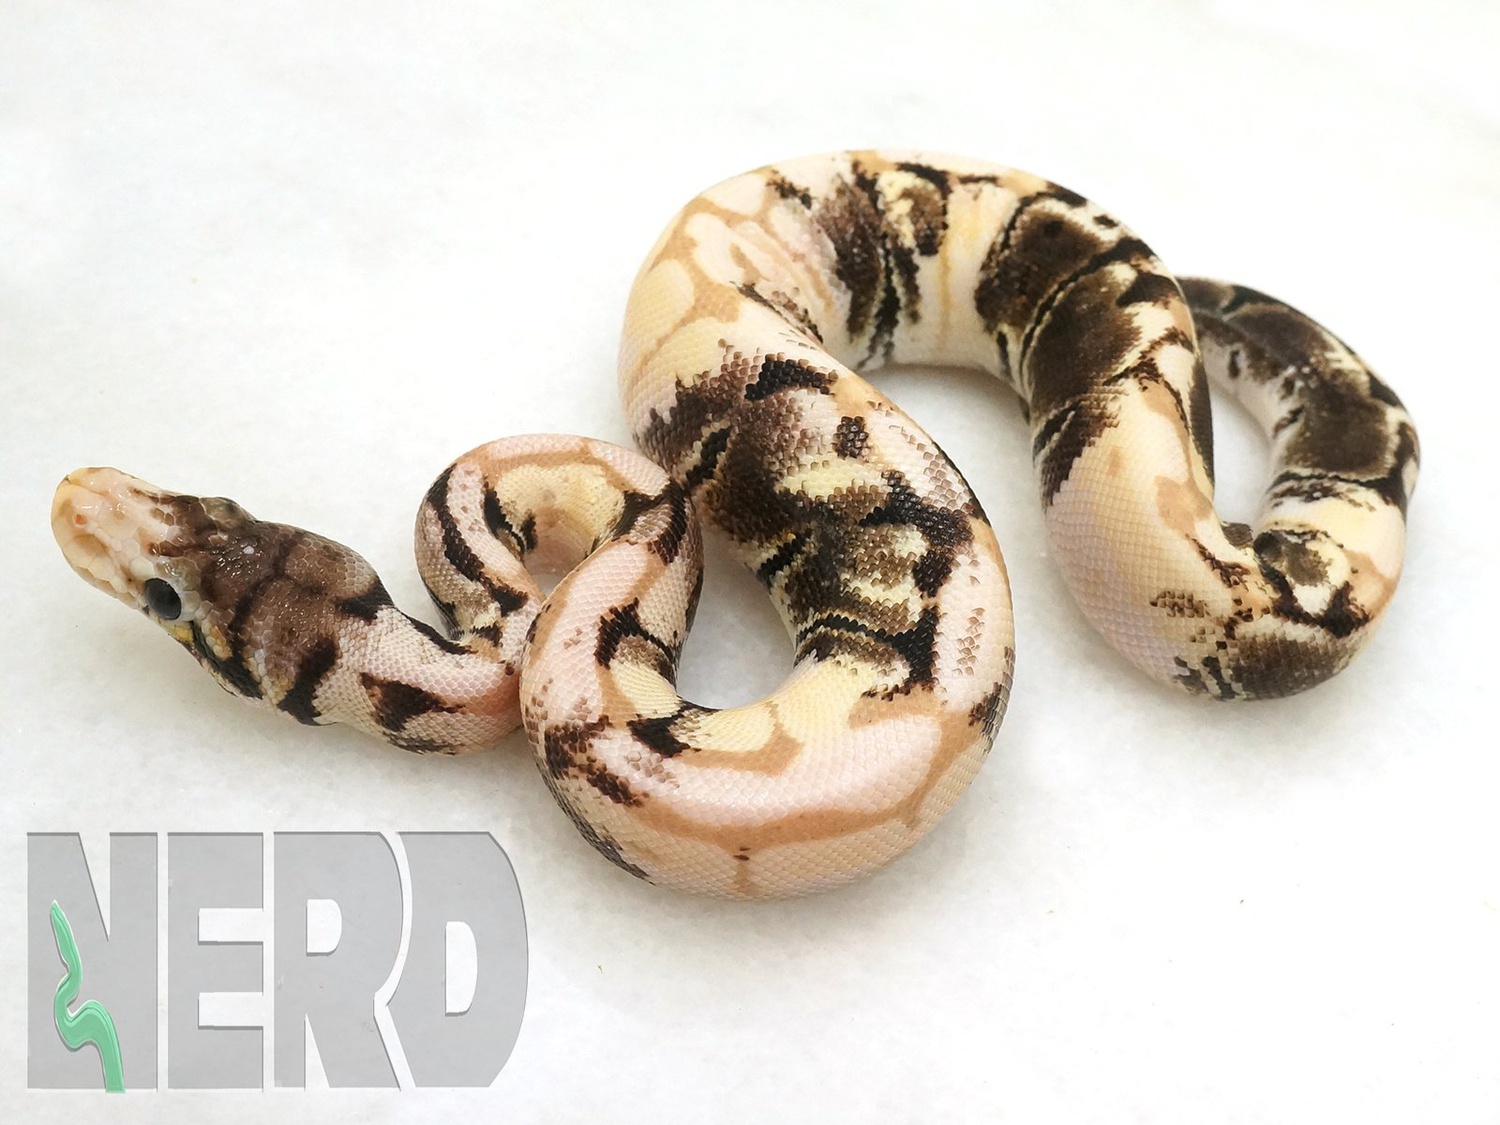 Paradox Axanthic Coral Glow Spider Possible Het Genetic Stripe Ball Python by New England Reptile Distributors